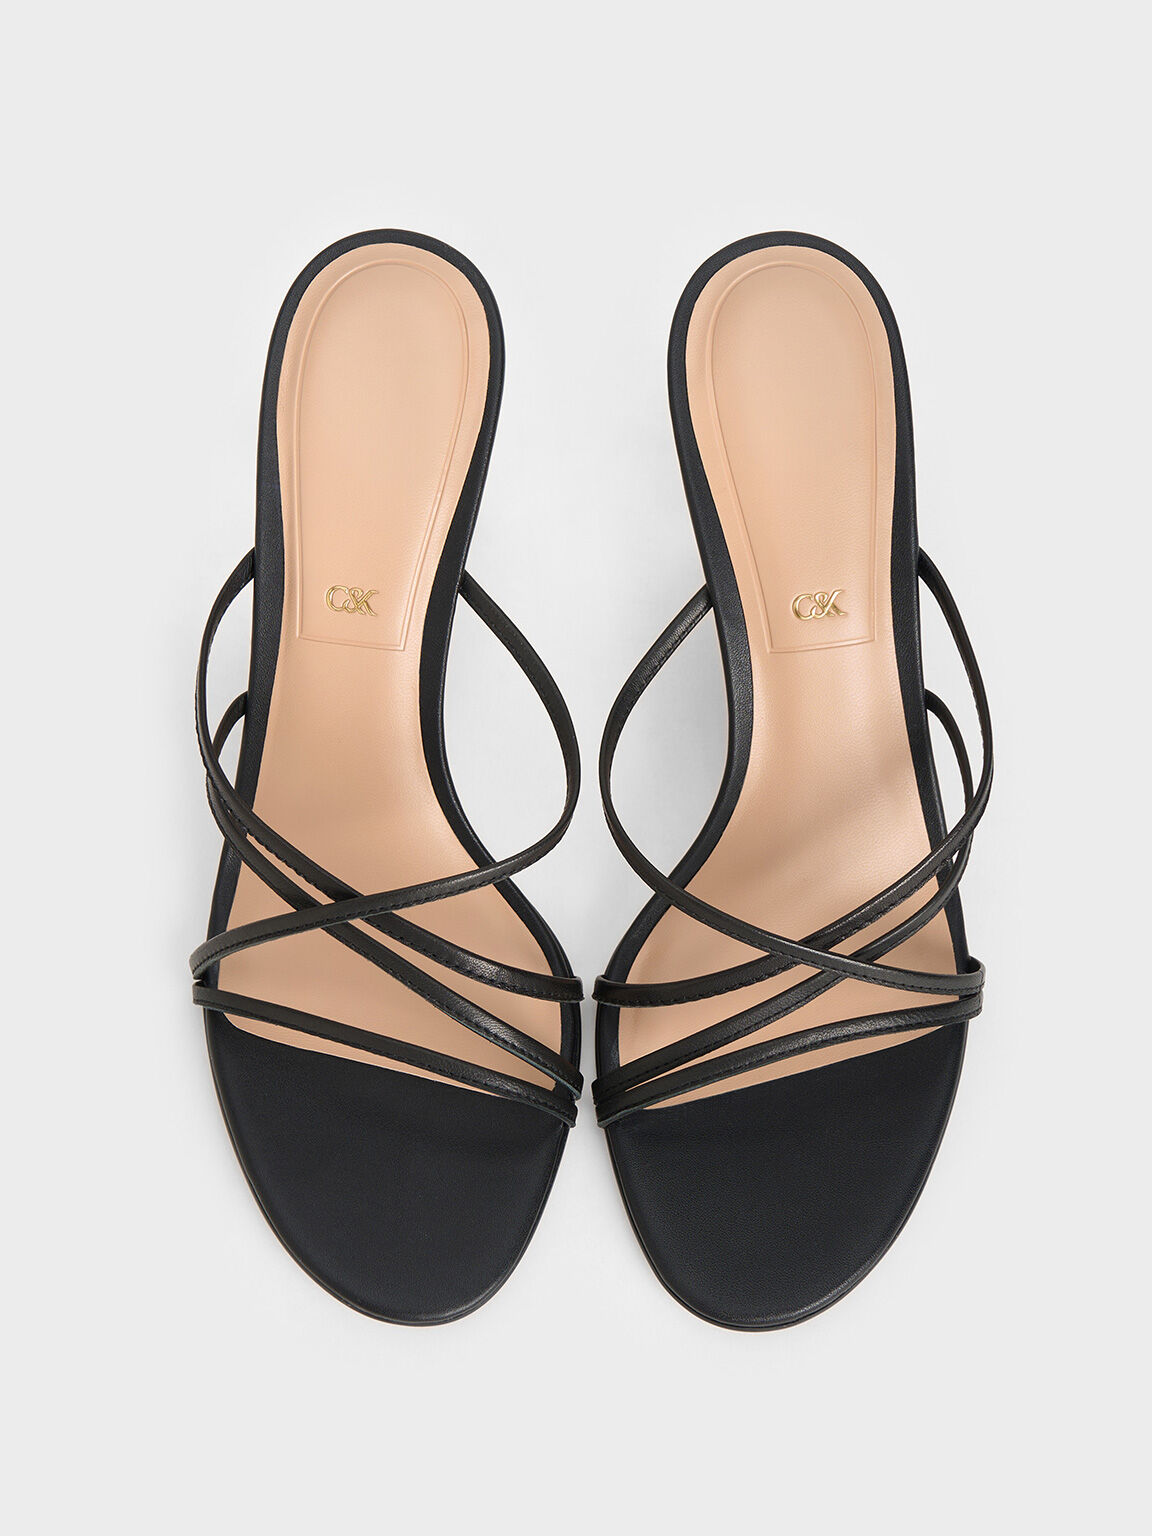 Orly Leather Strappy Slant-Heel Mules, Black, hi-res